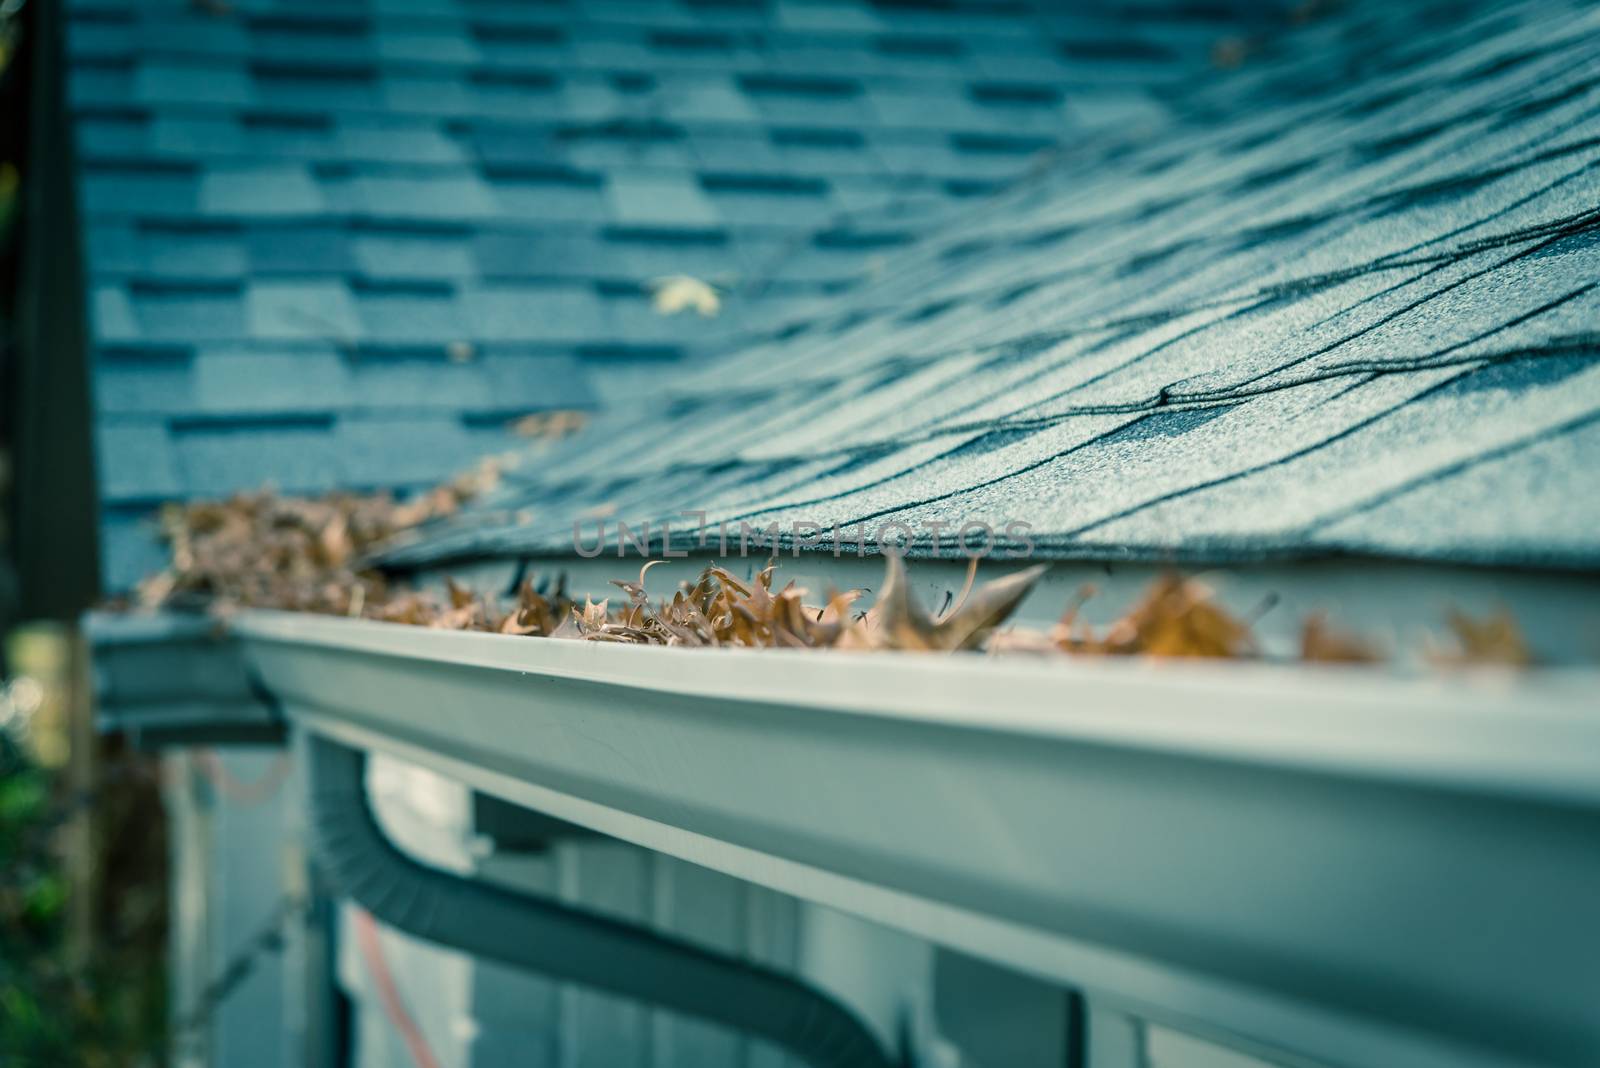 Selective focus clogged gutter near roof shingles of residential house full of dried leaves and dirty need to clean-up. Blocked drain pipe on rooftop. Gutter cleaning and home maintenance concept